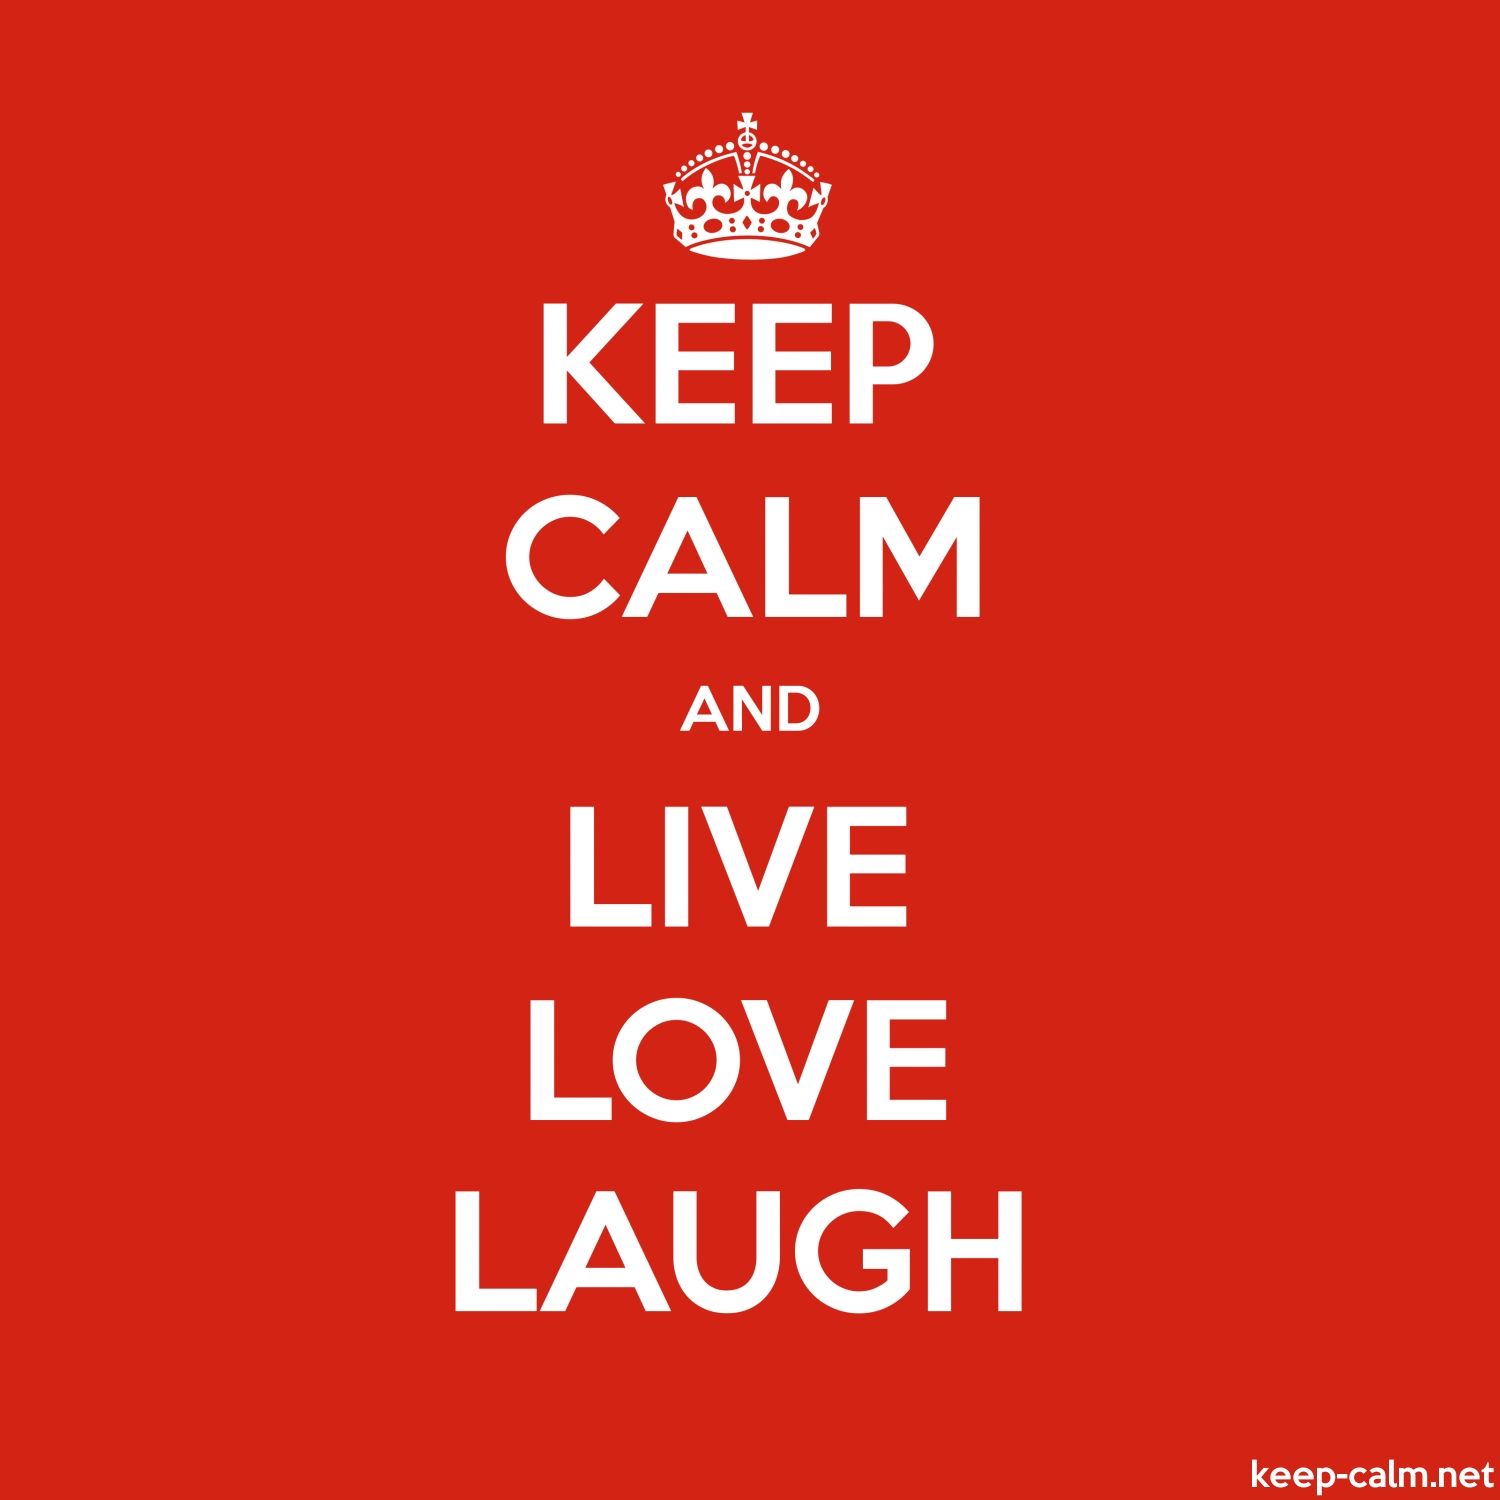 KEEP CALM AND LIVE LOVE LAUGH